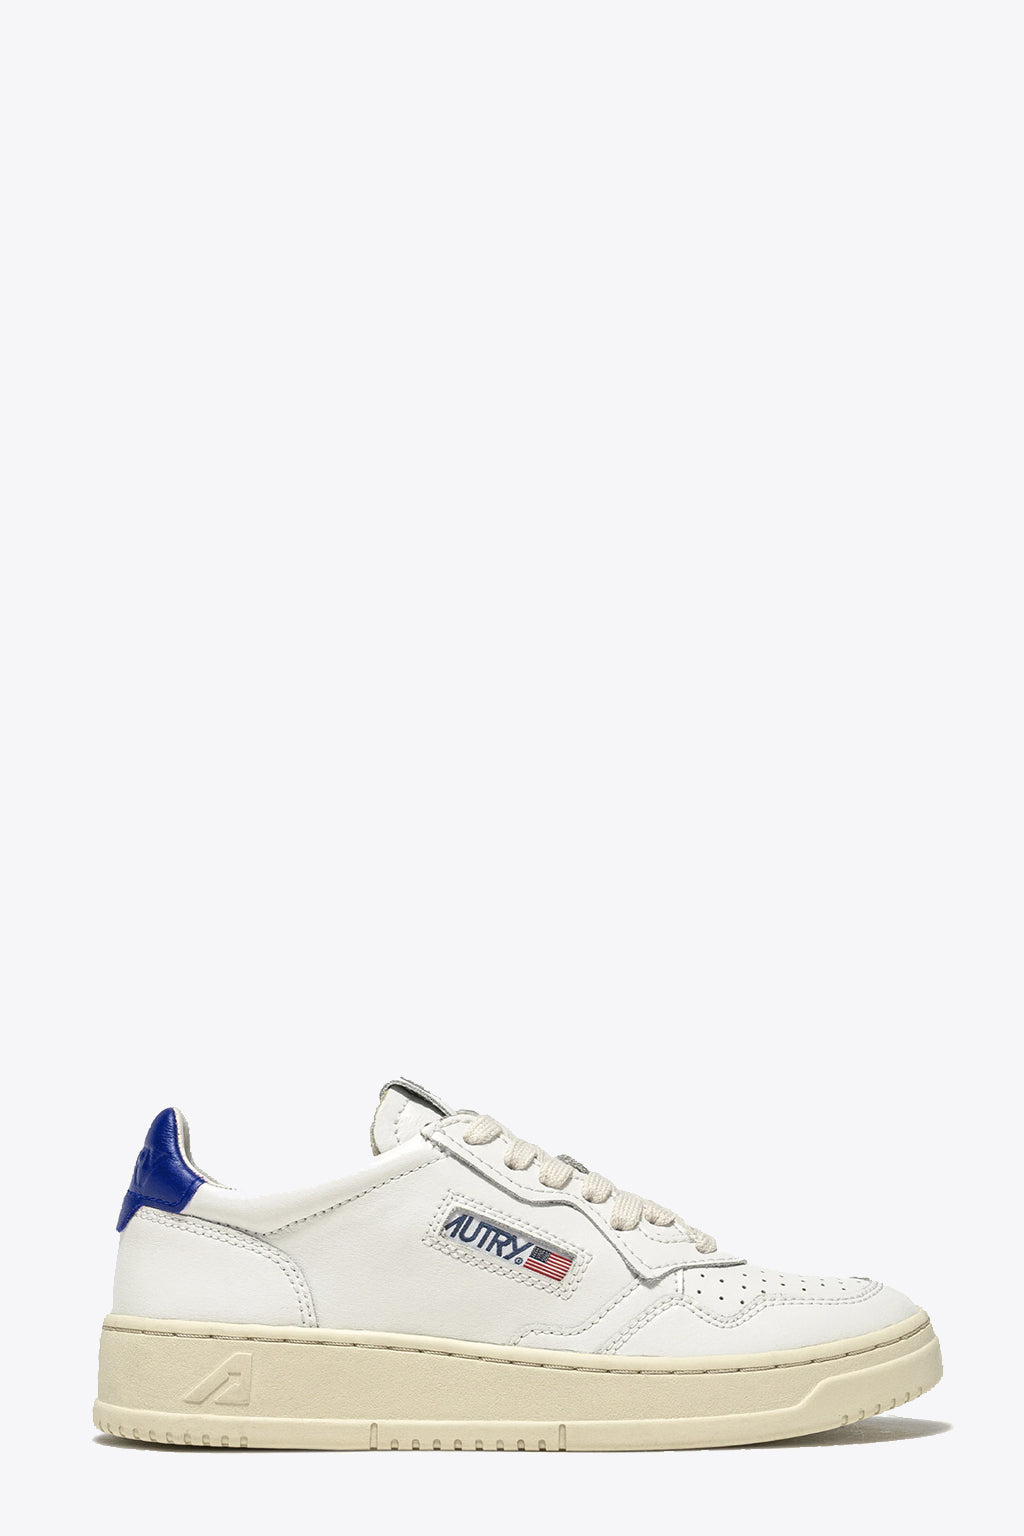 alt-image__White-leather-sneaker-with-blue-back-tab---Medalist